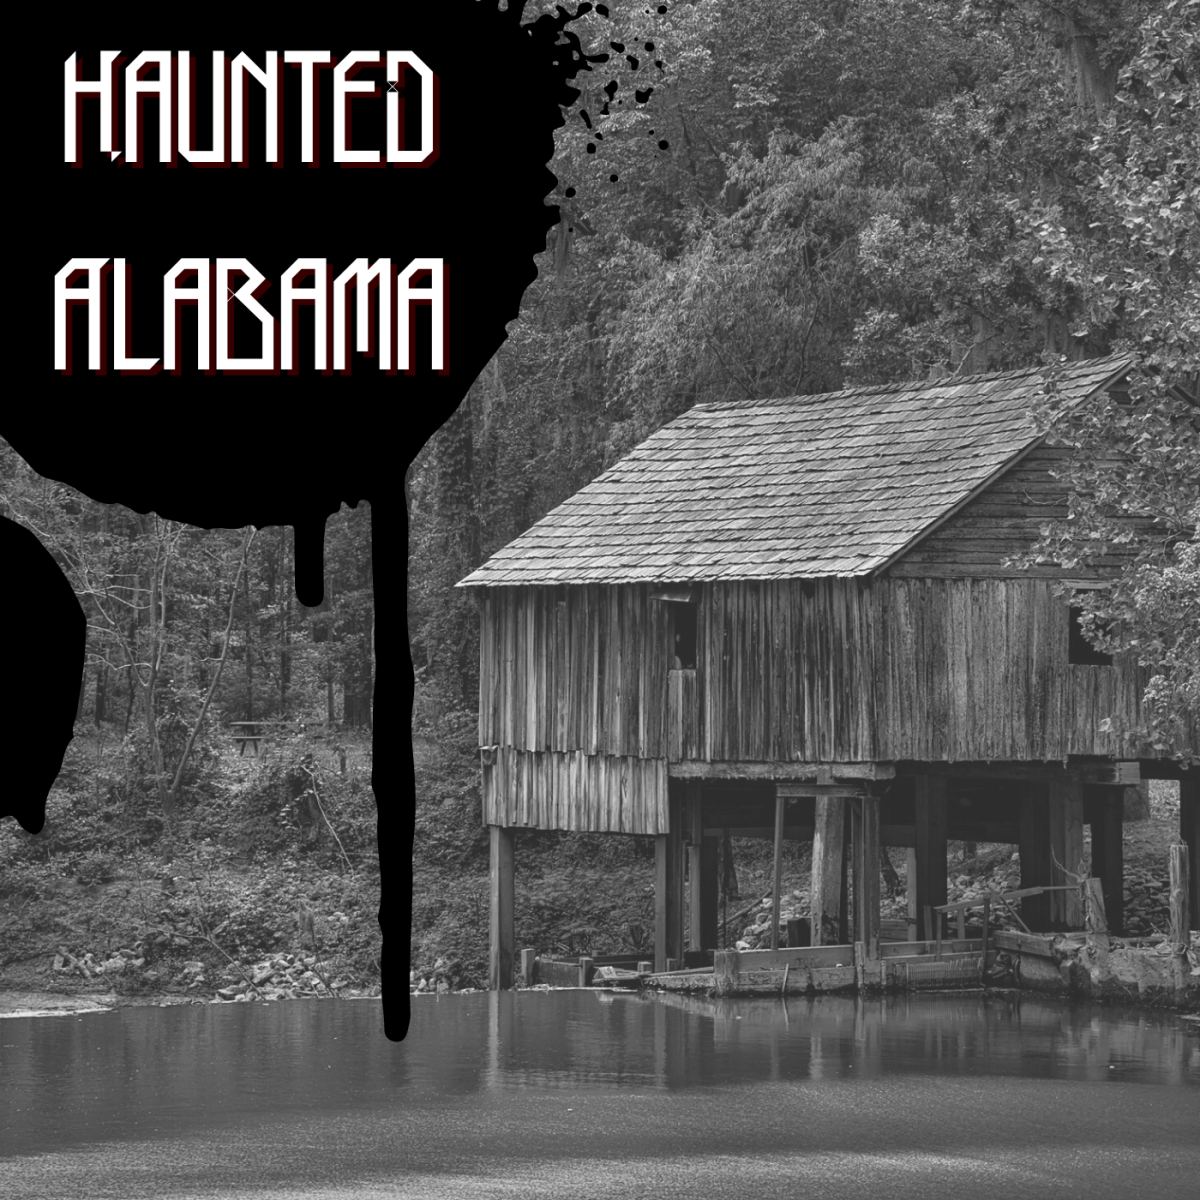 Alabama is home to several haunted locations.